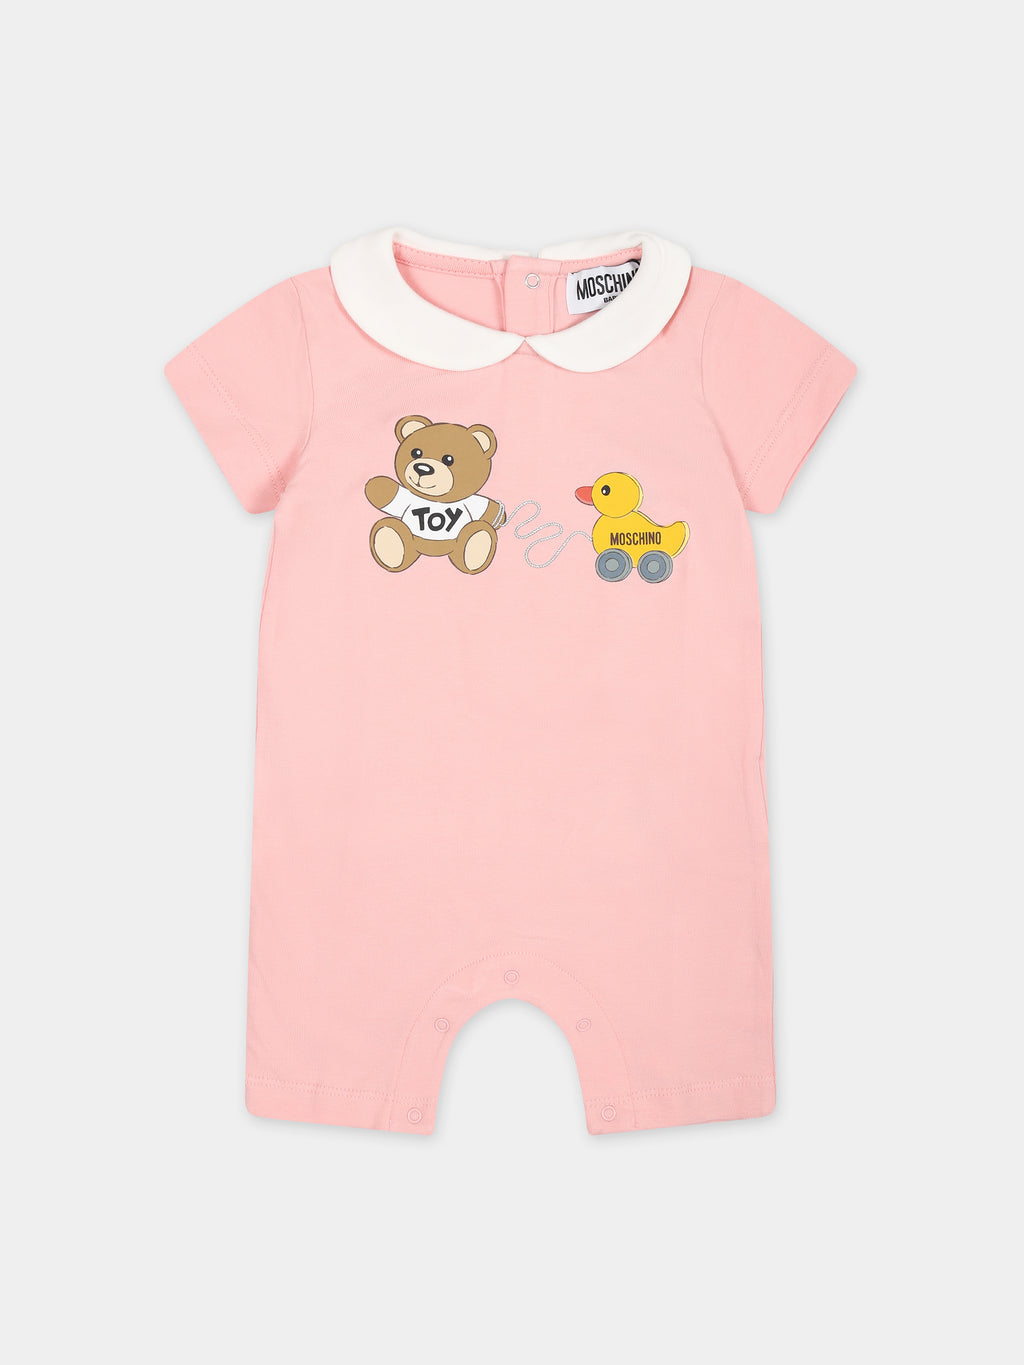 Pink bodysuit for baby girl with Teddy Bear and duck